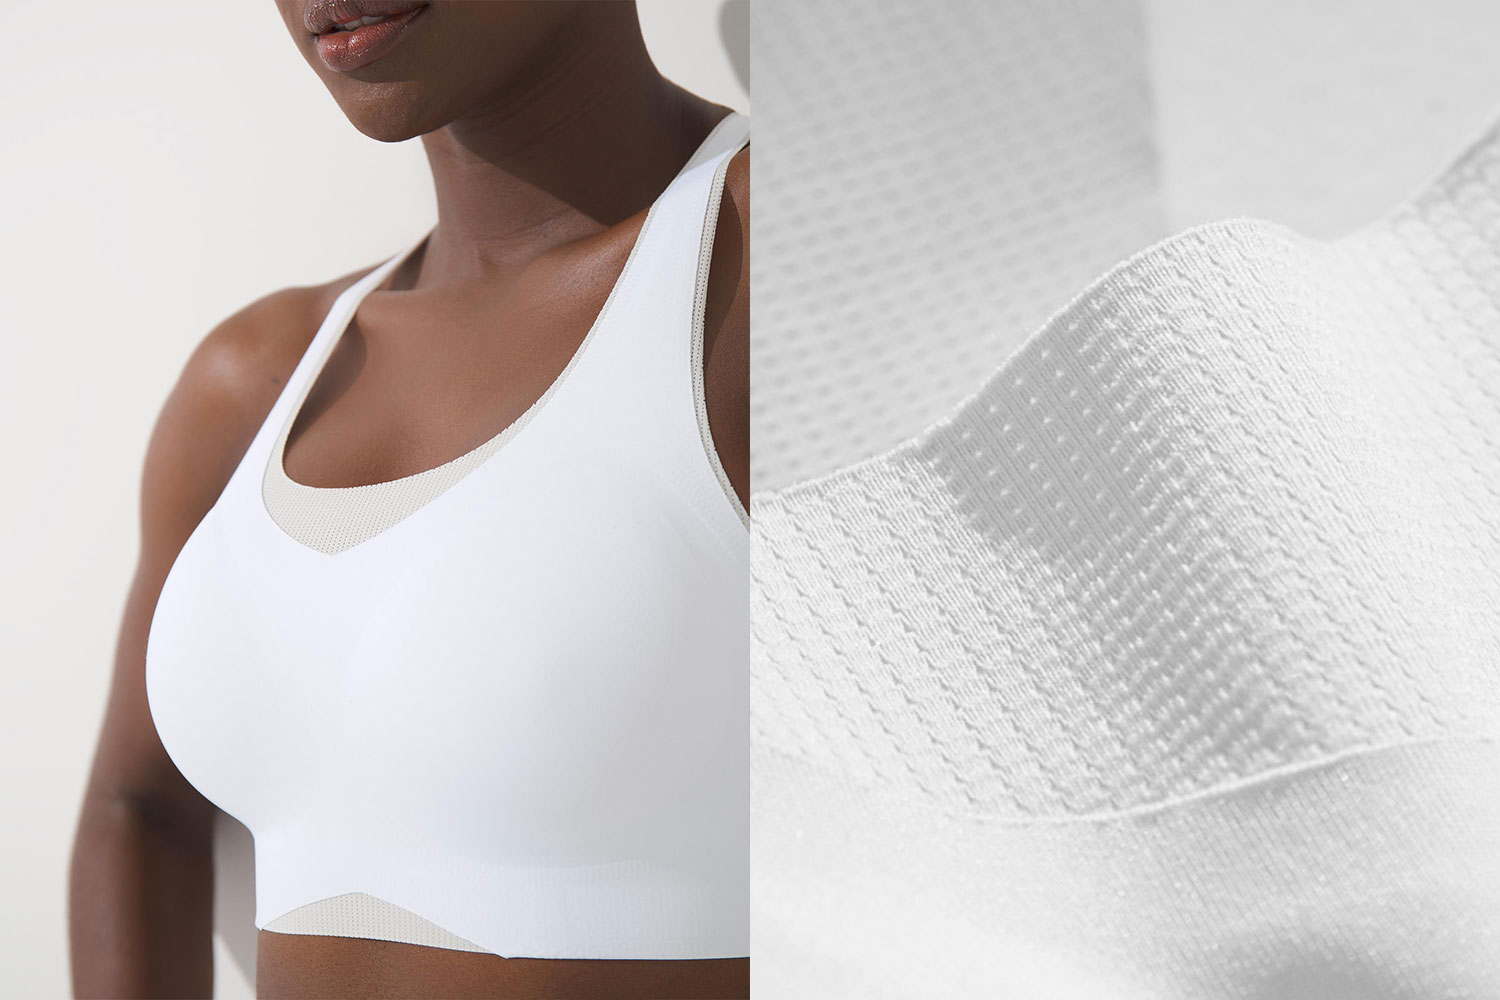 Soma women's model wearing a white sports bra next to a close-up image of recycled polyester fabric.